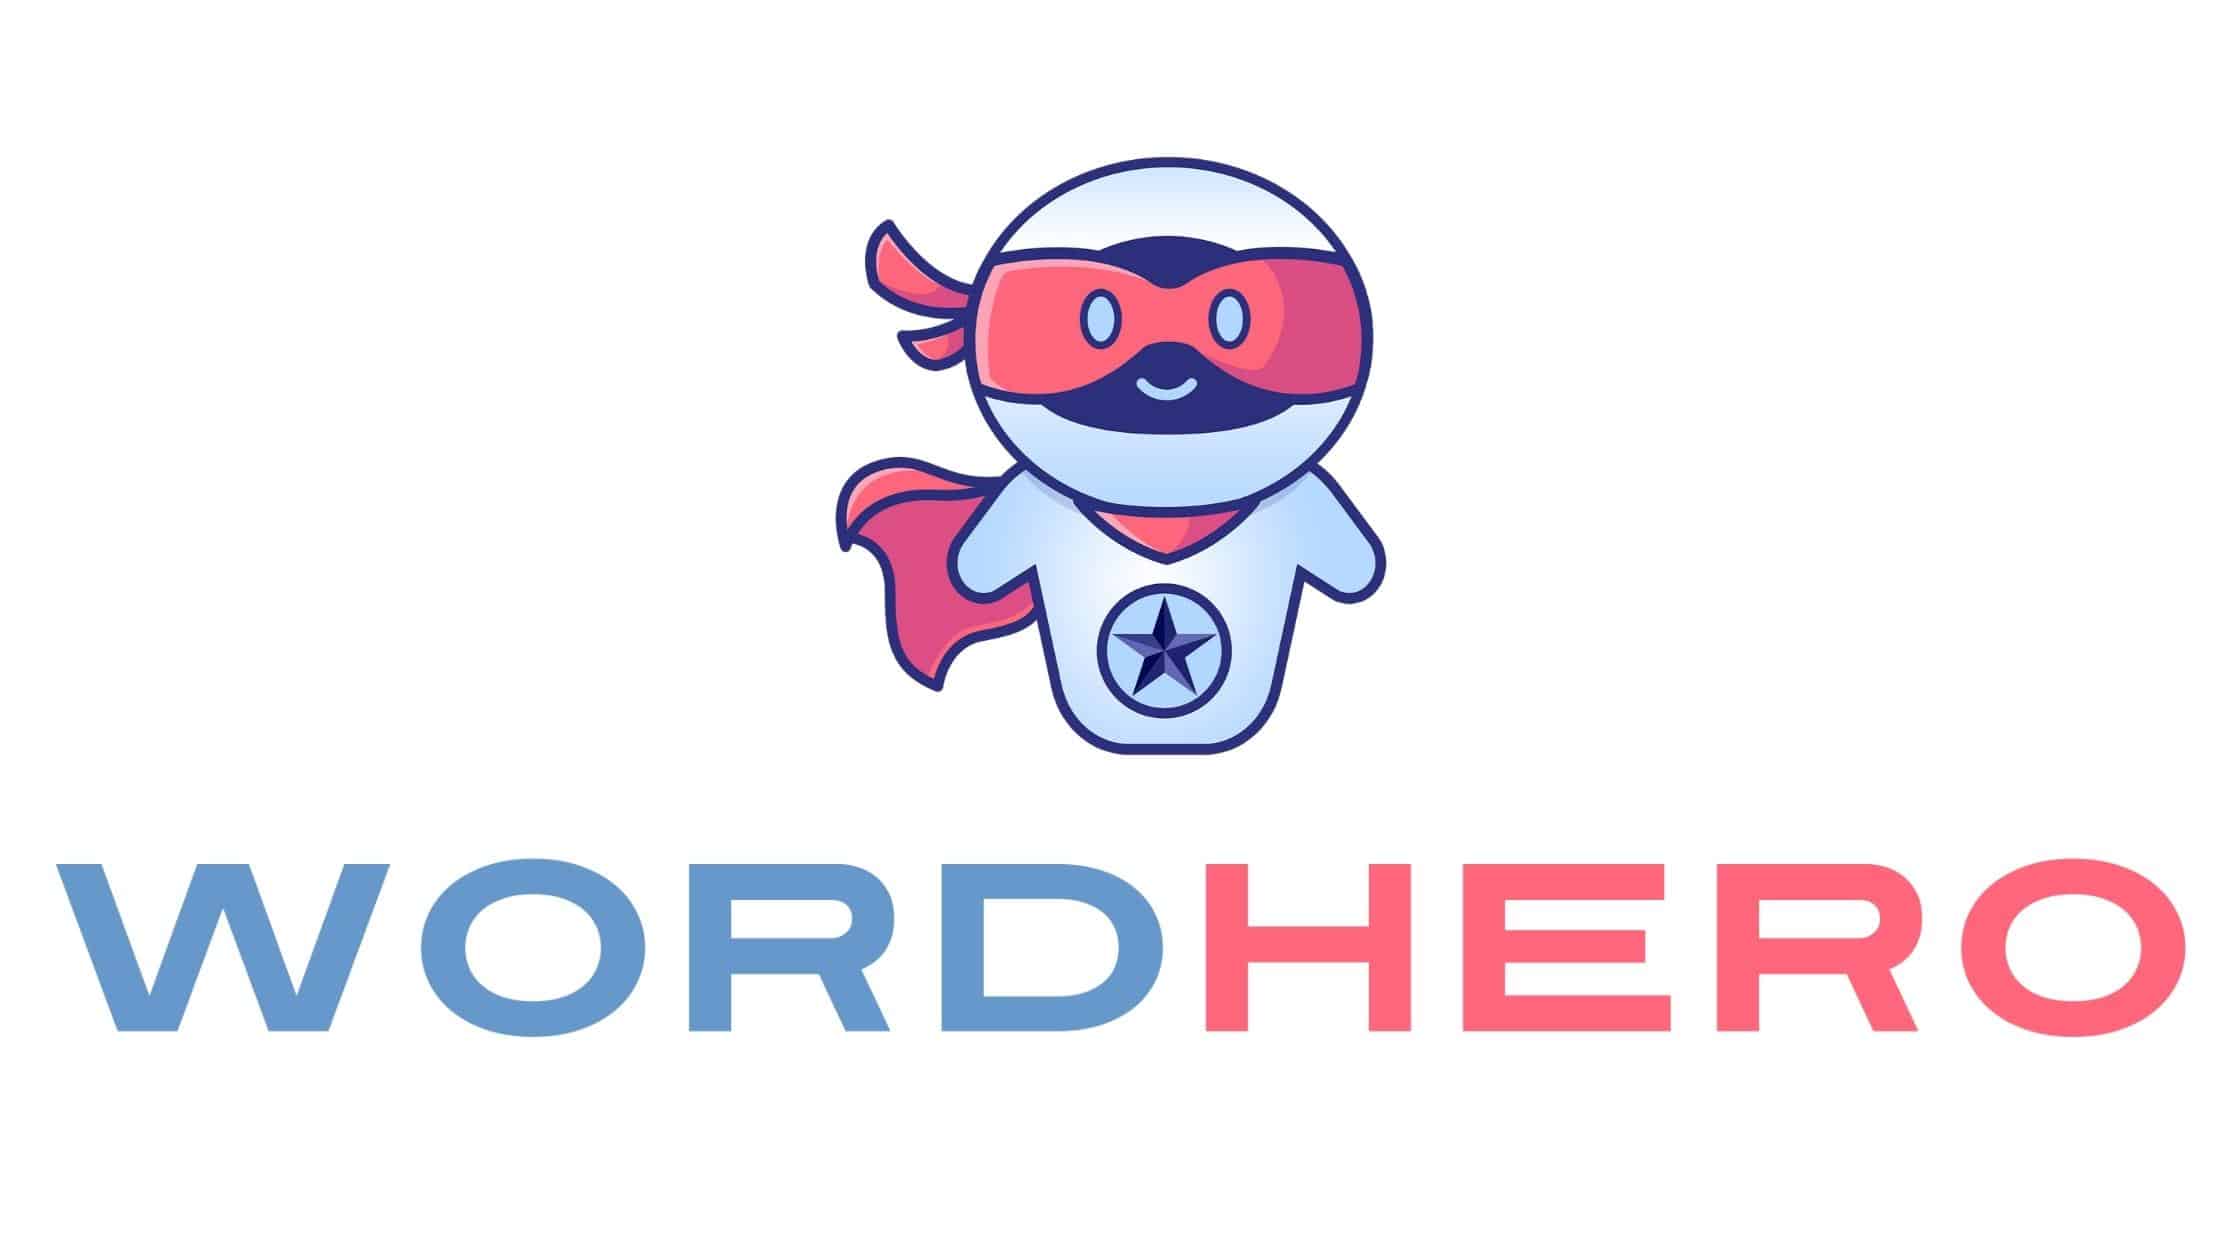 The wordhero logo with the company name underneath